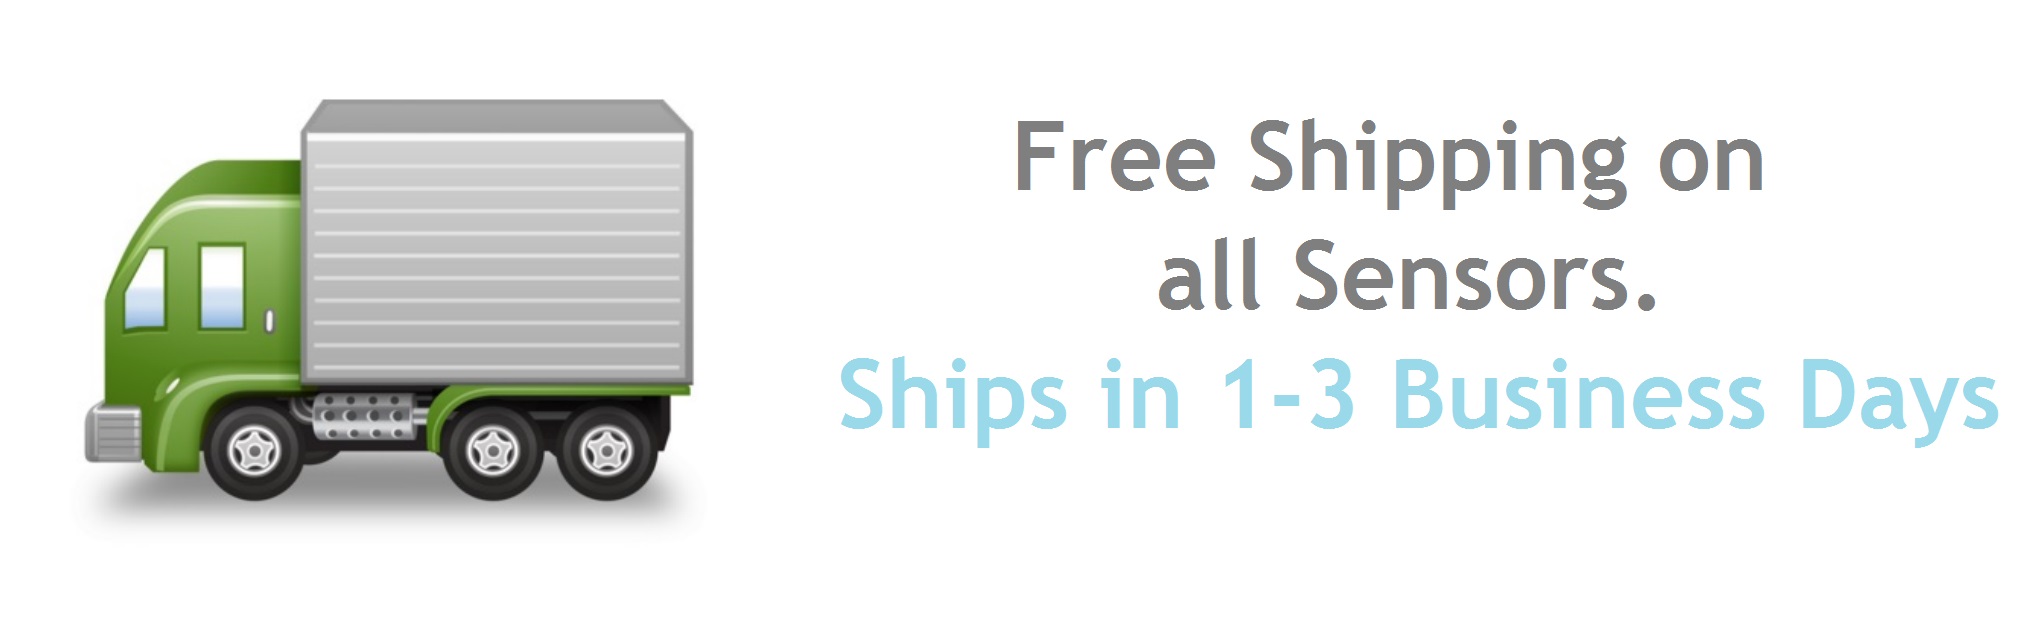 Free Shipping on all Sensors